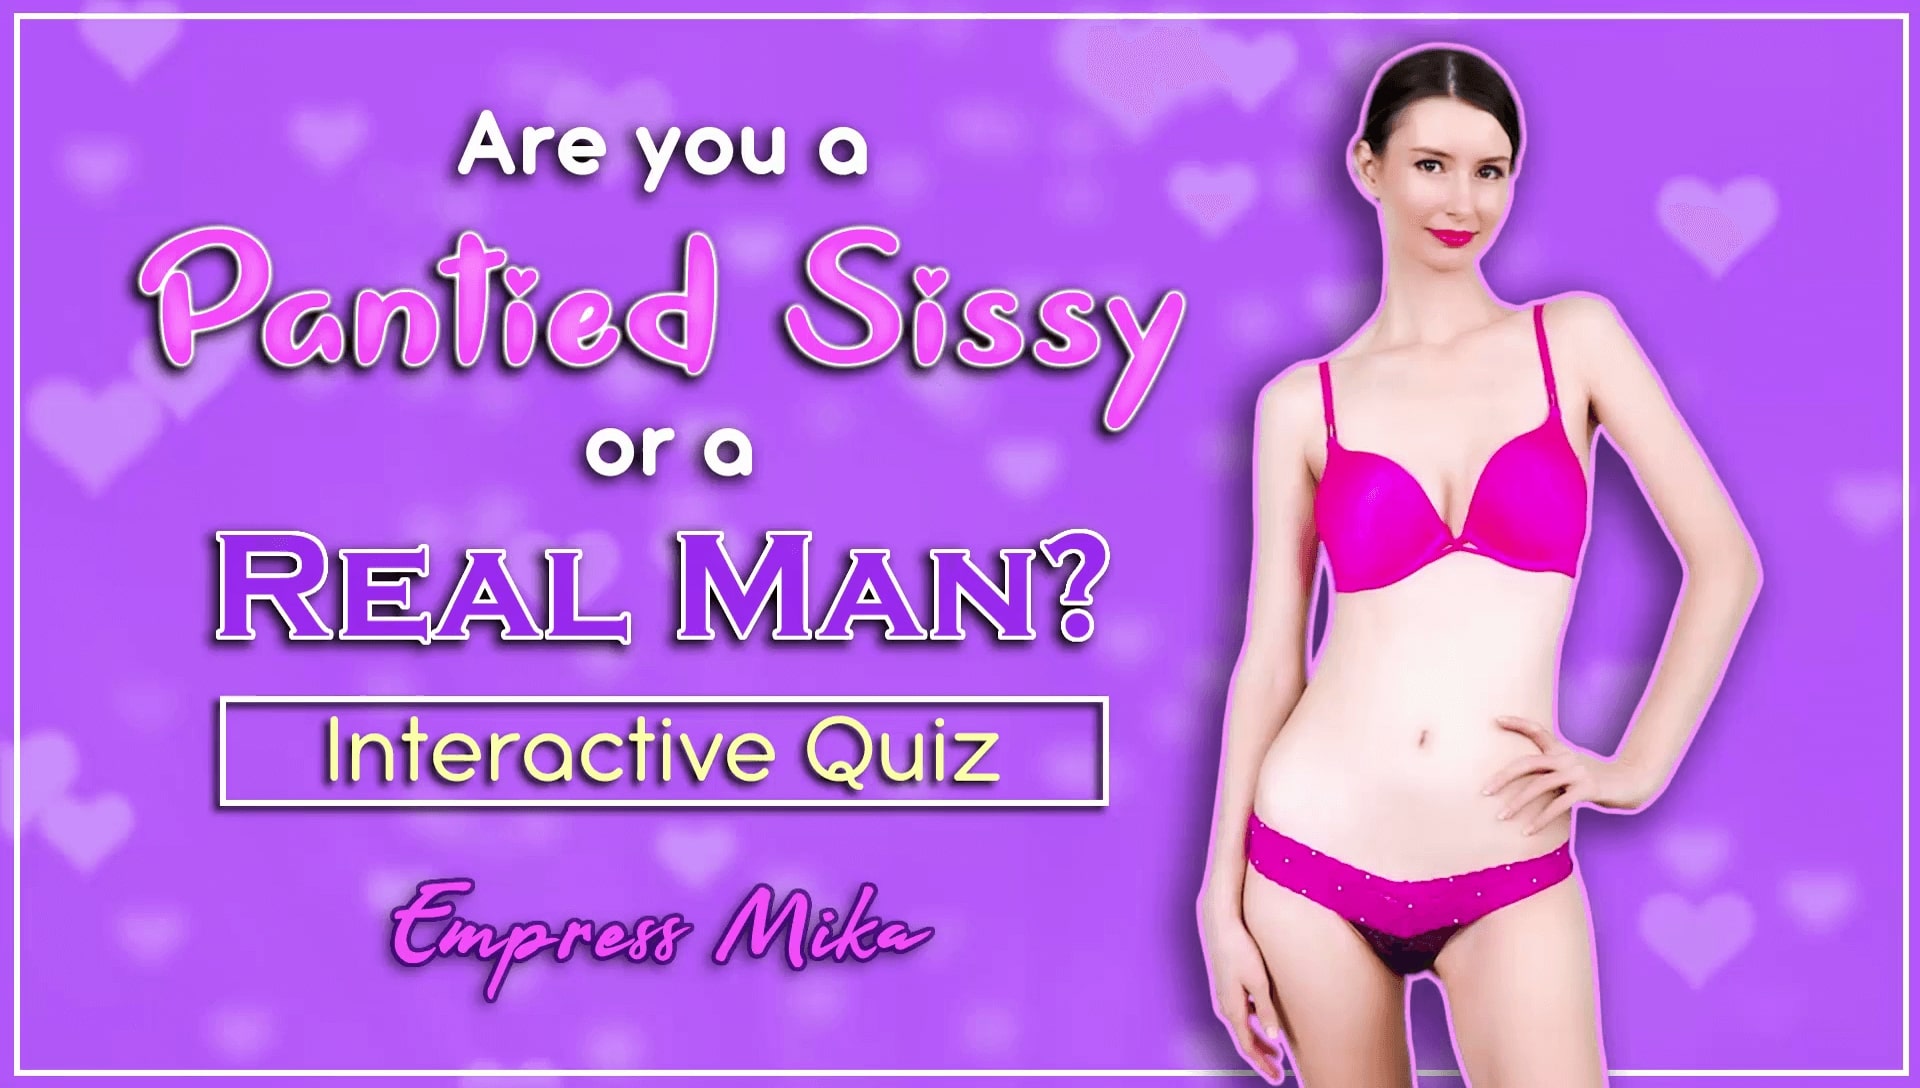 Are you a Pantied Sissy or a Real Man? FemDom Quiz